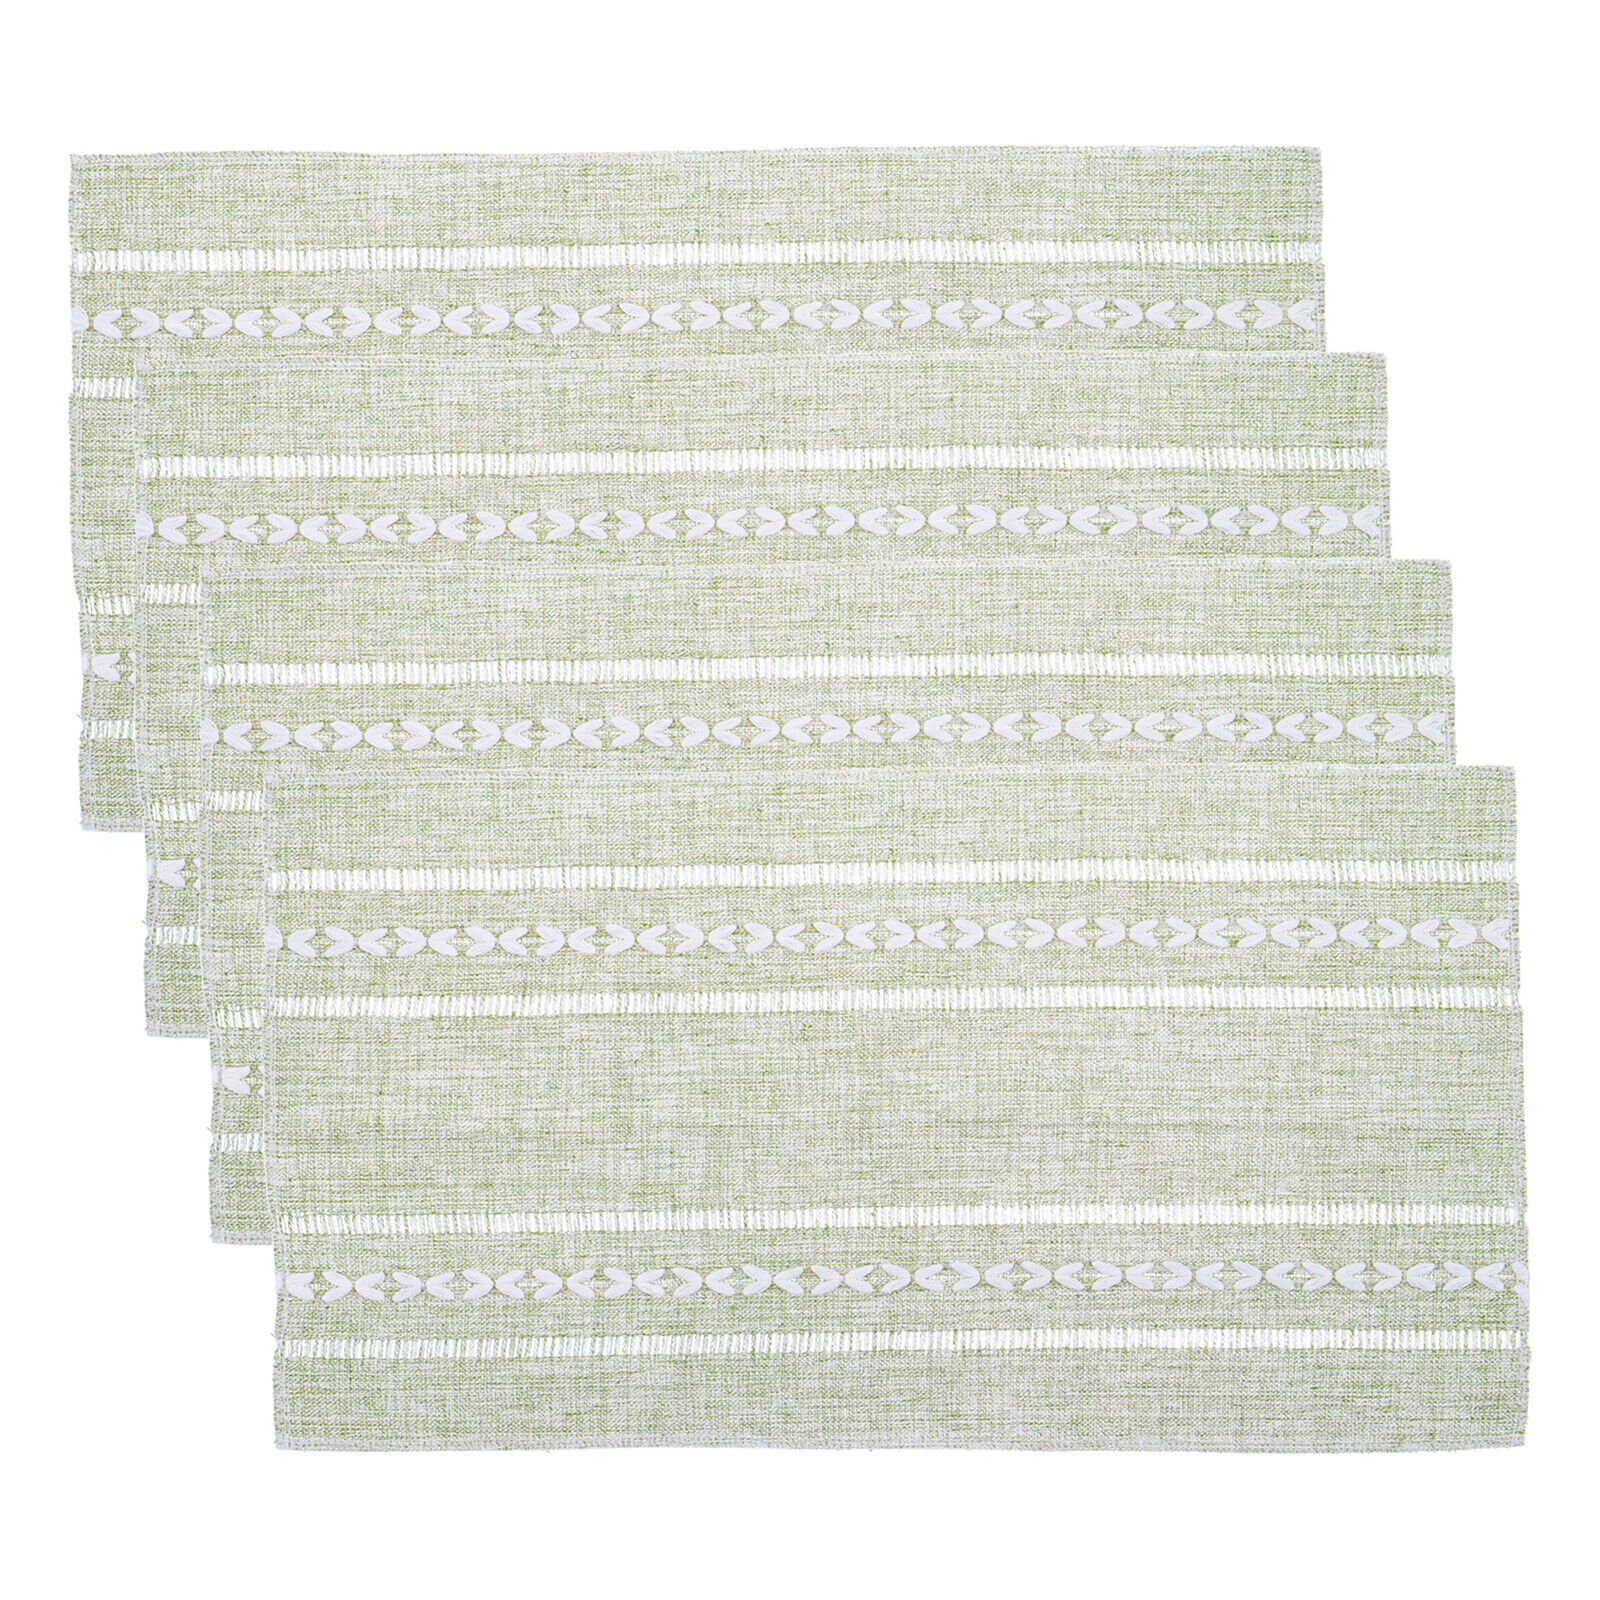 Placemats Set of 4, 12 x 20 Inch Cotton Linen Place Mats for Kitchen (Green)